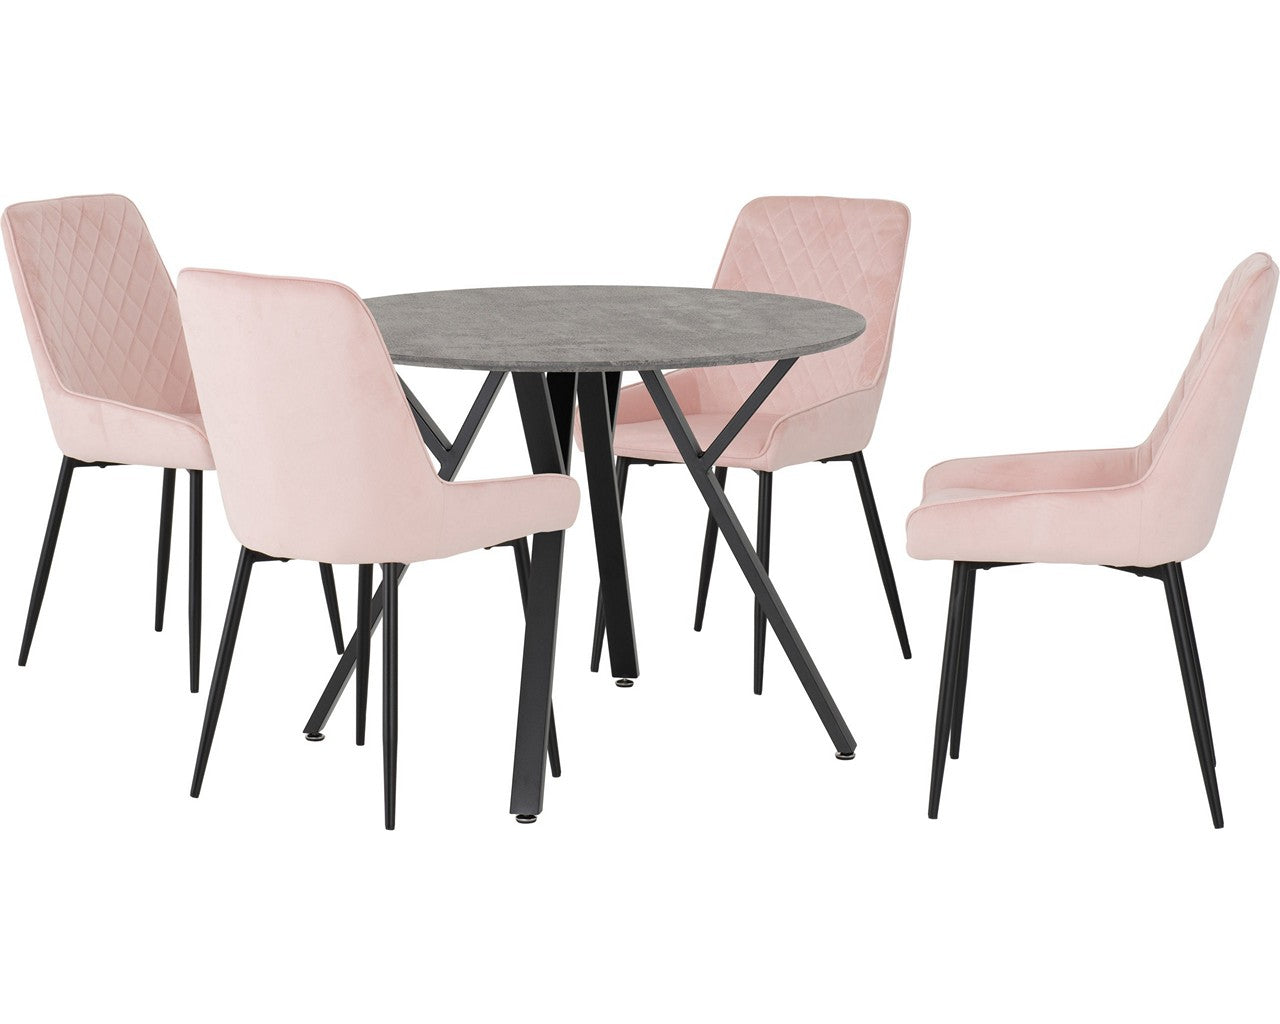 athens-round-dining-set-avery-chairs - 4